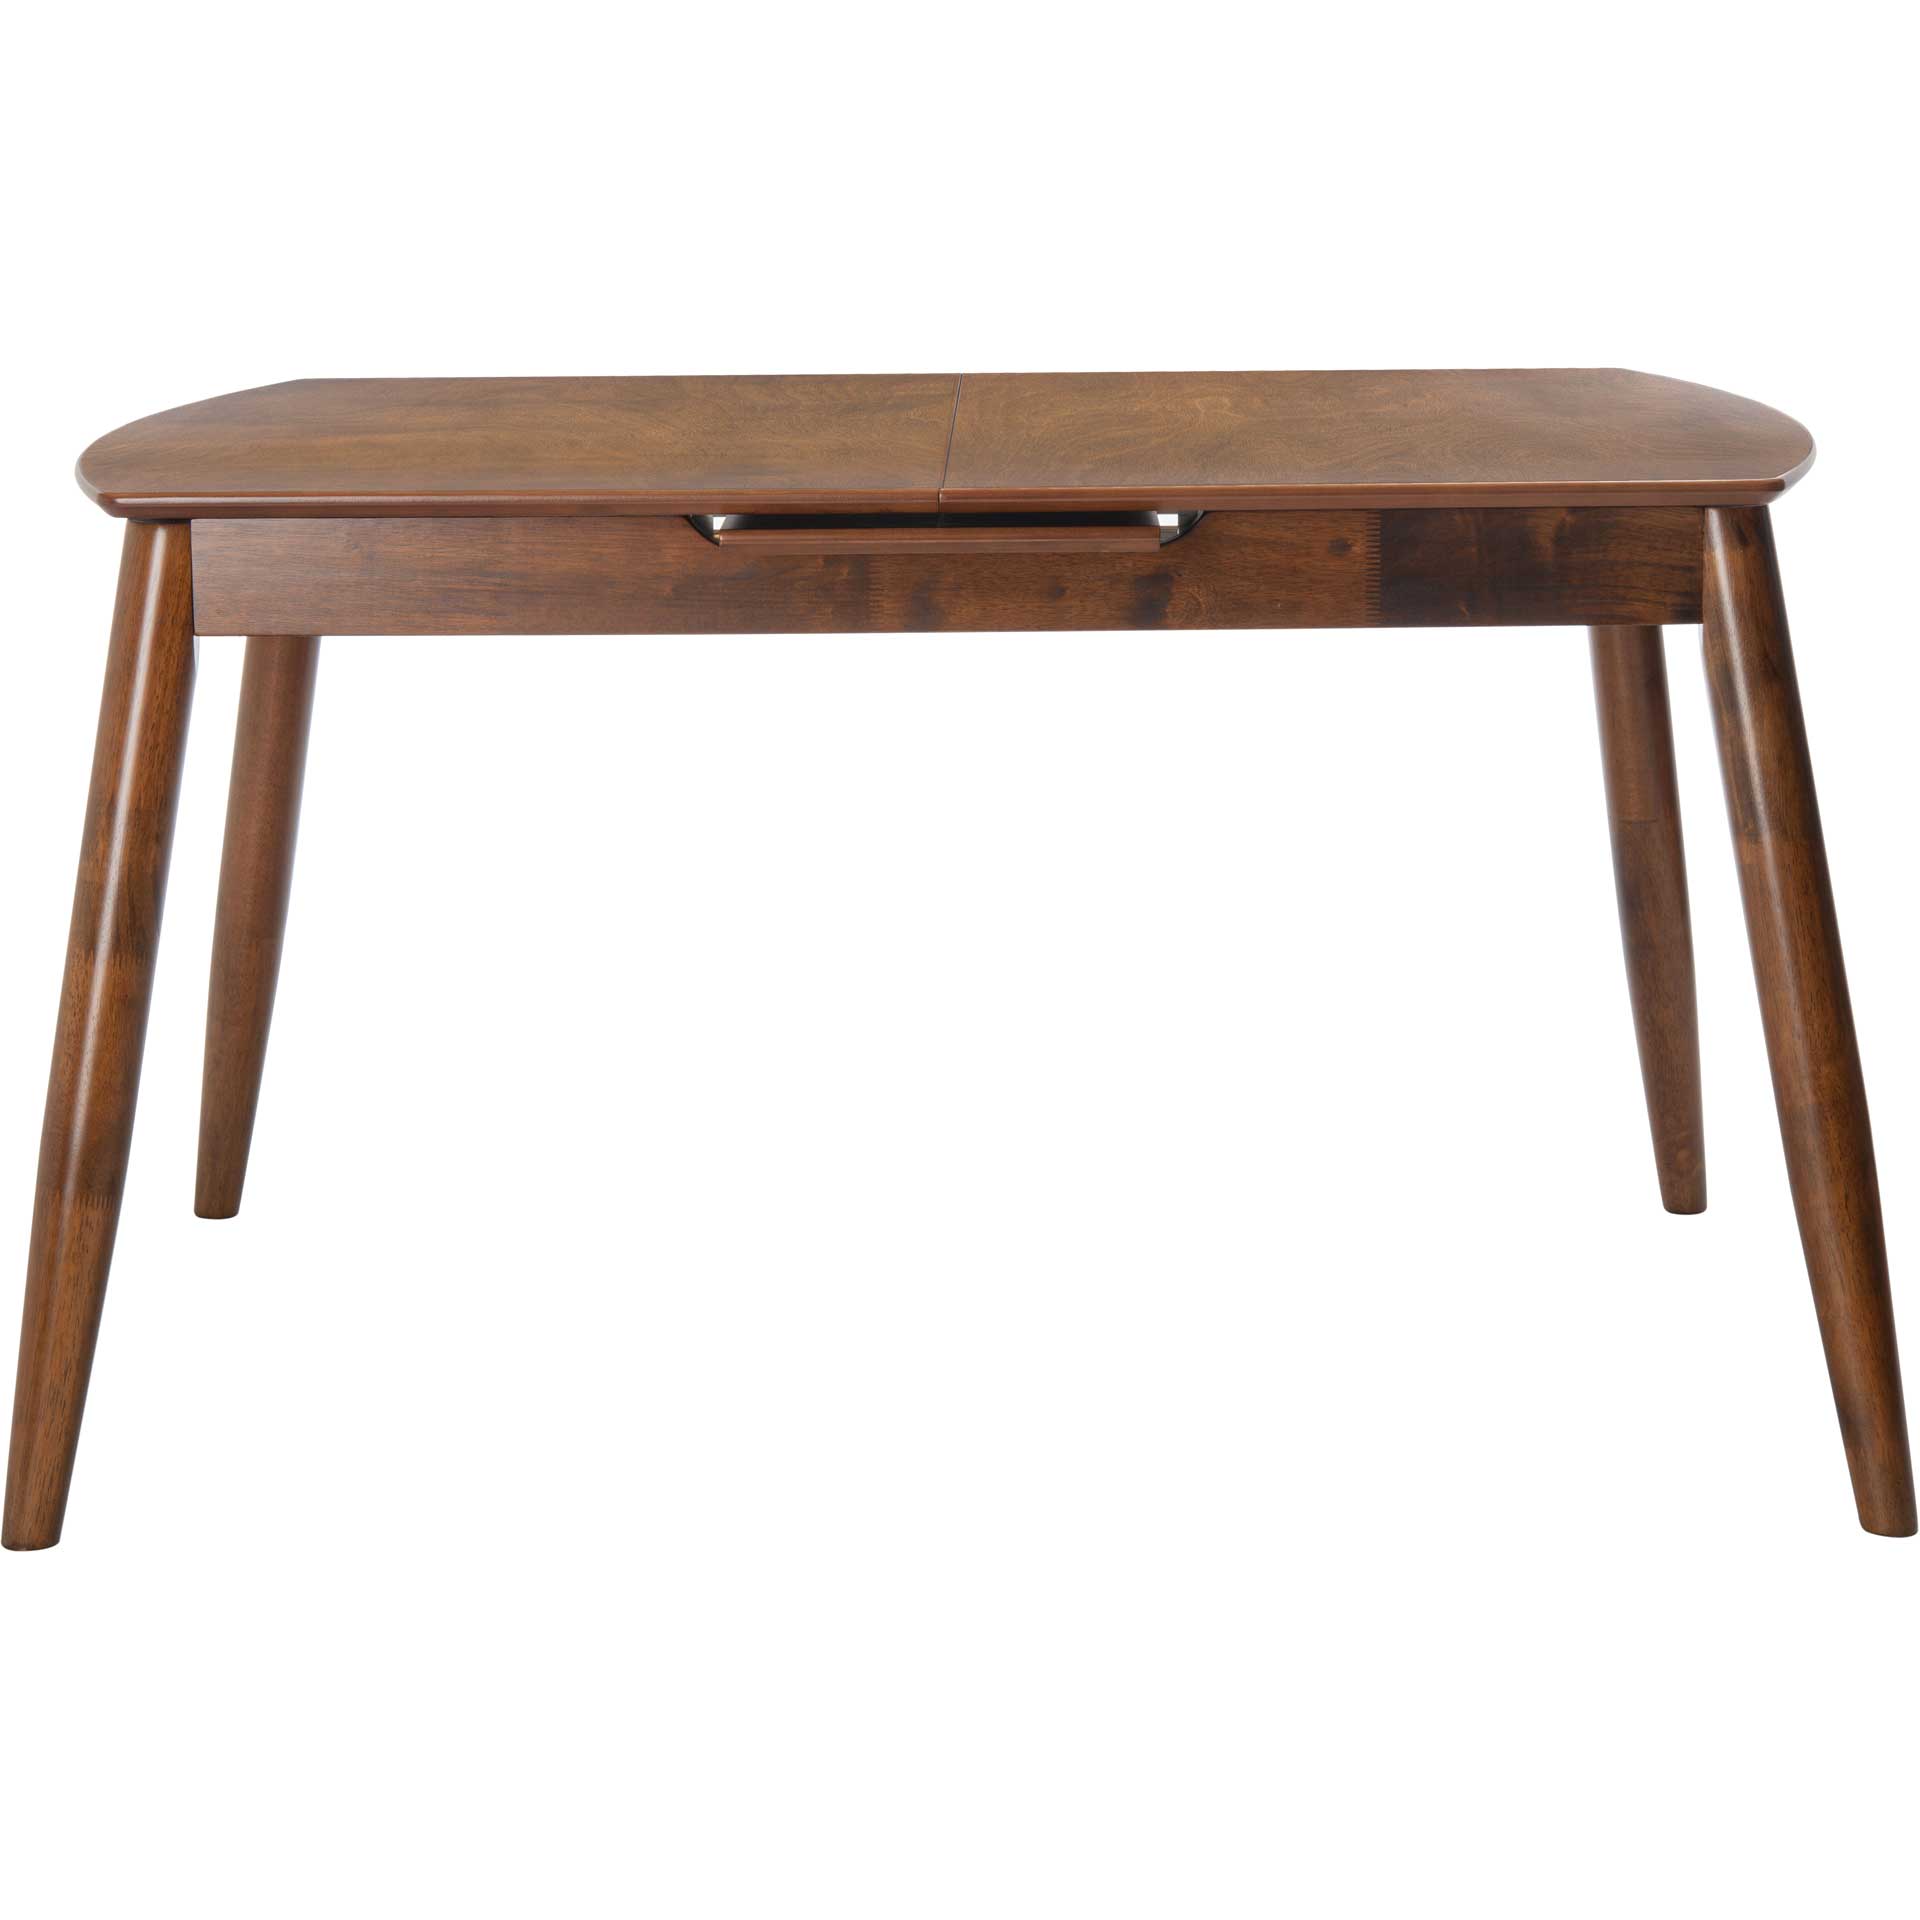 Kylie Auto Mechanism Extension Dining Table Walnut